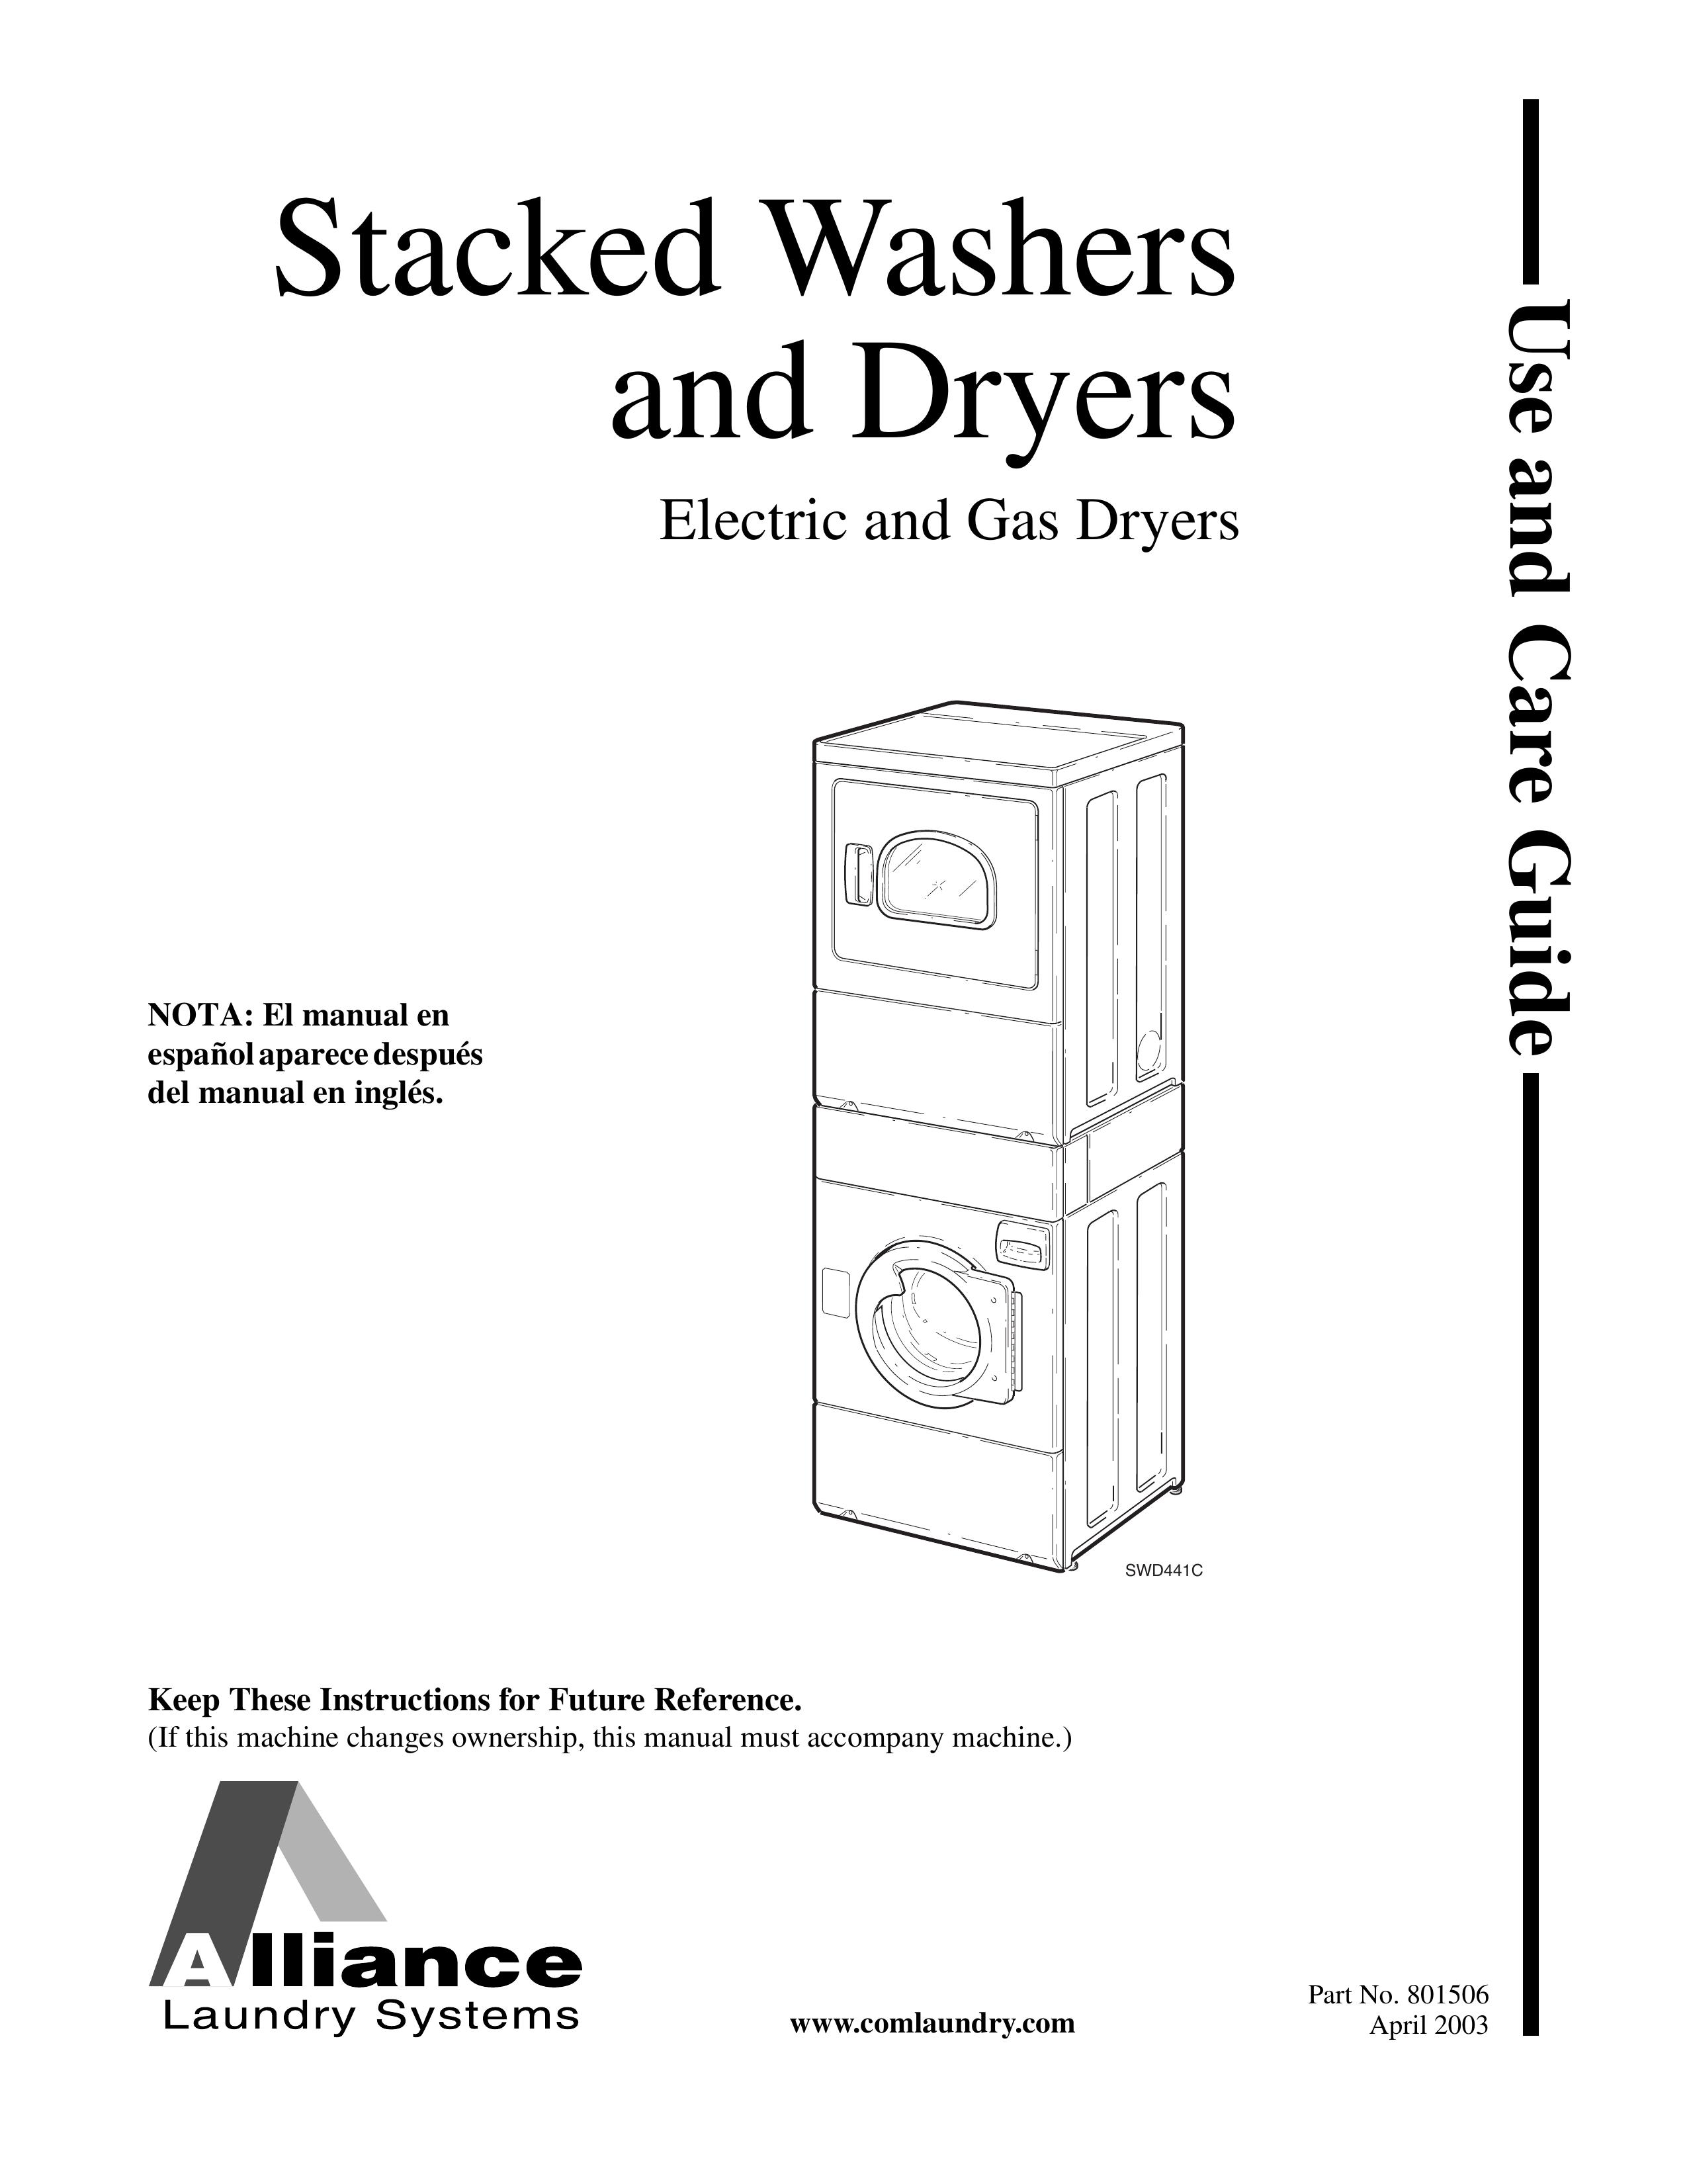 Alliance Laundry Systems SWD441C Washer/Dryer User Manual (Page 1)